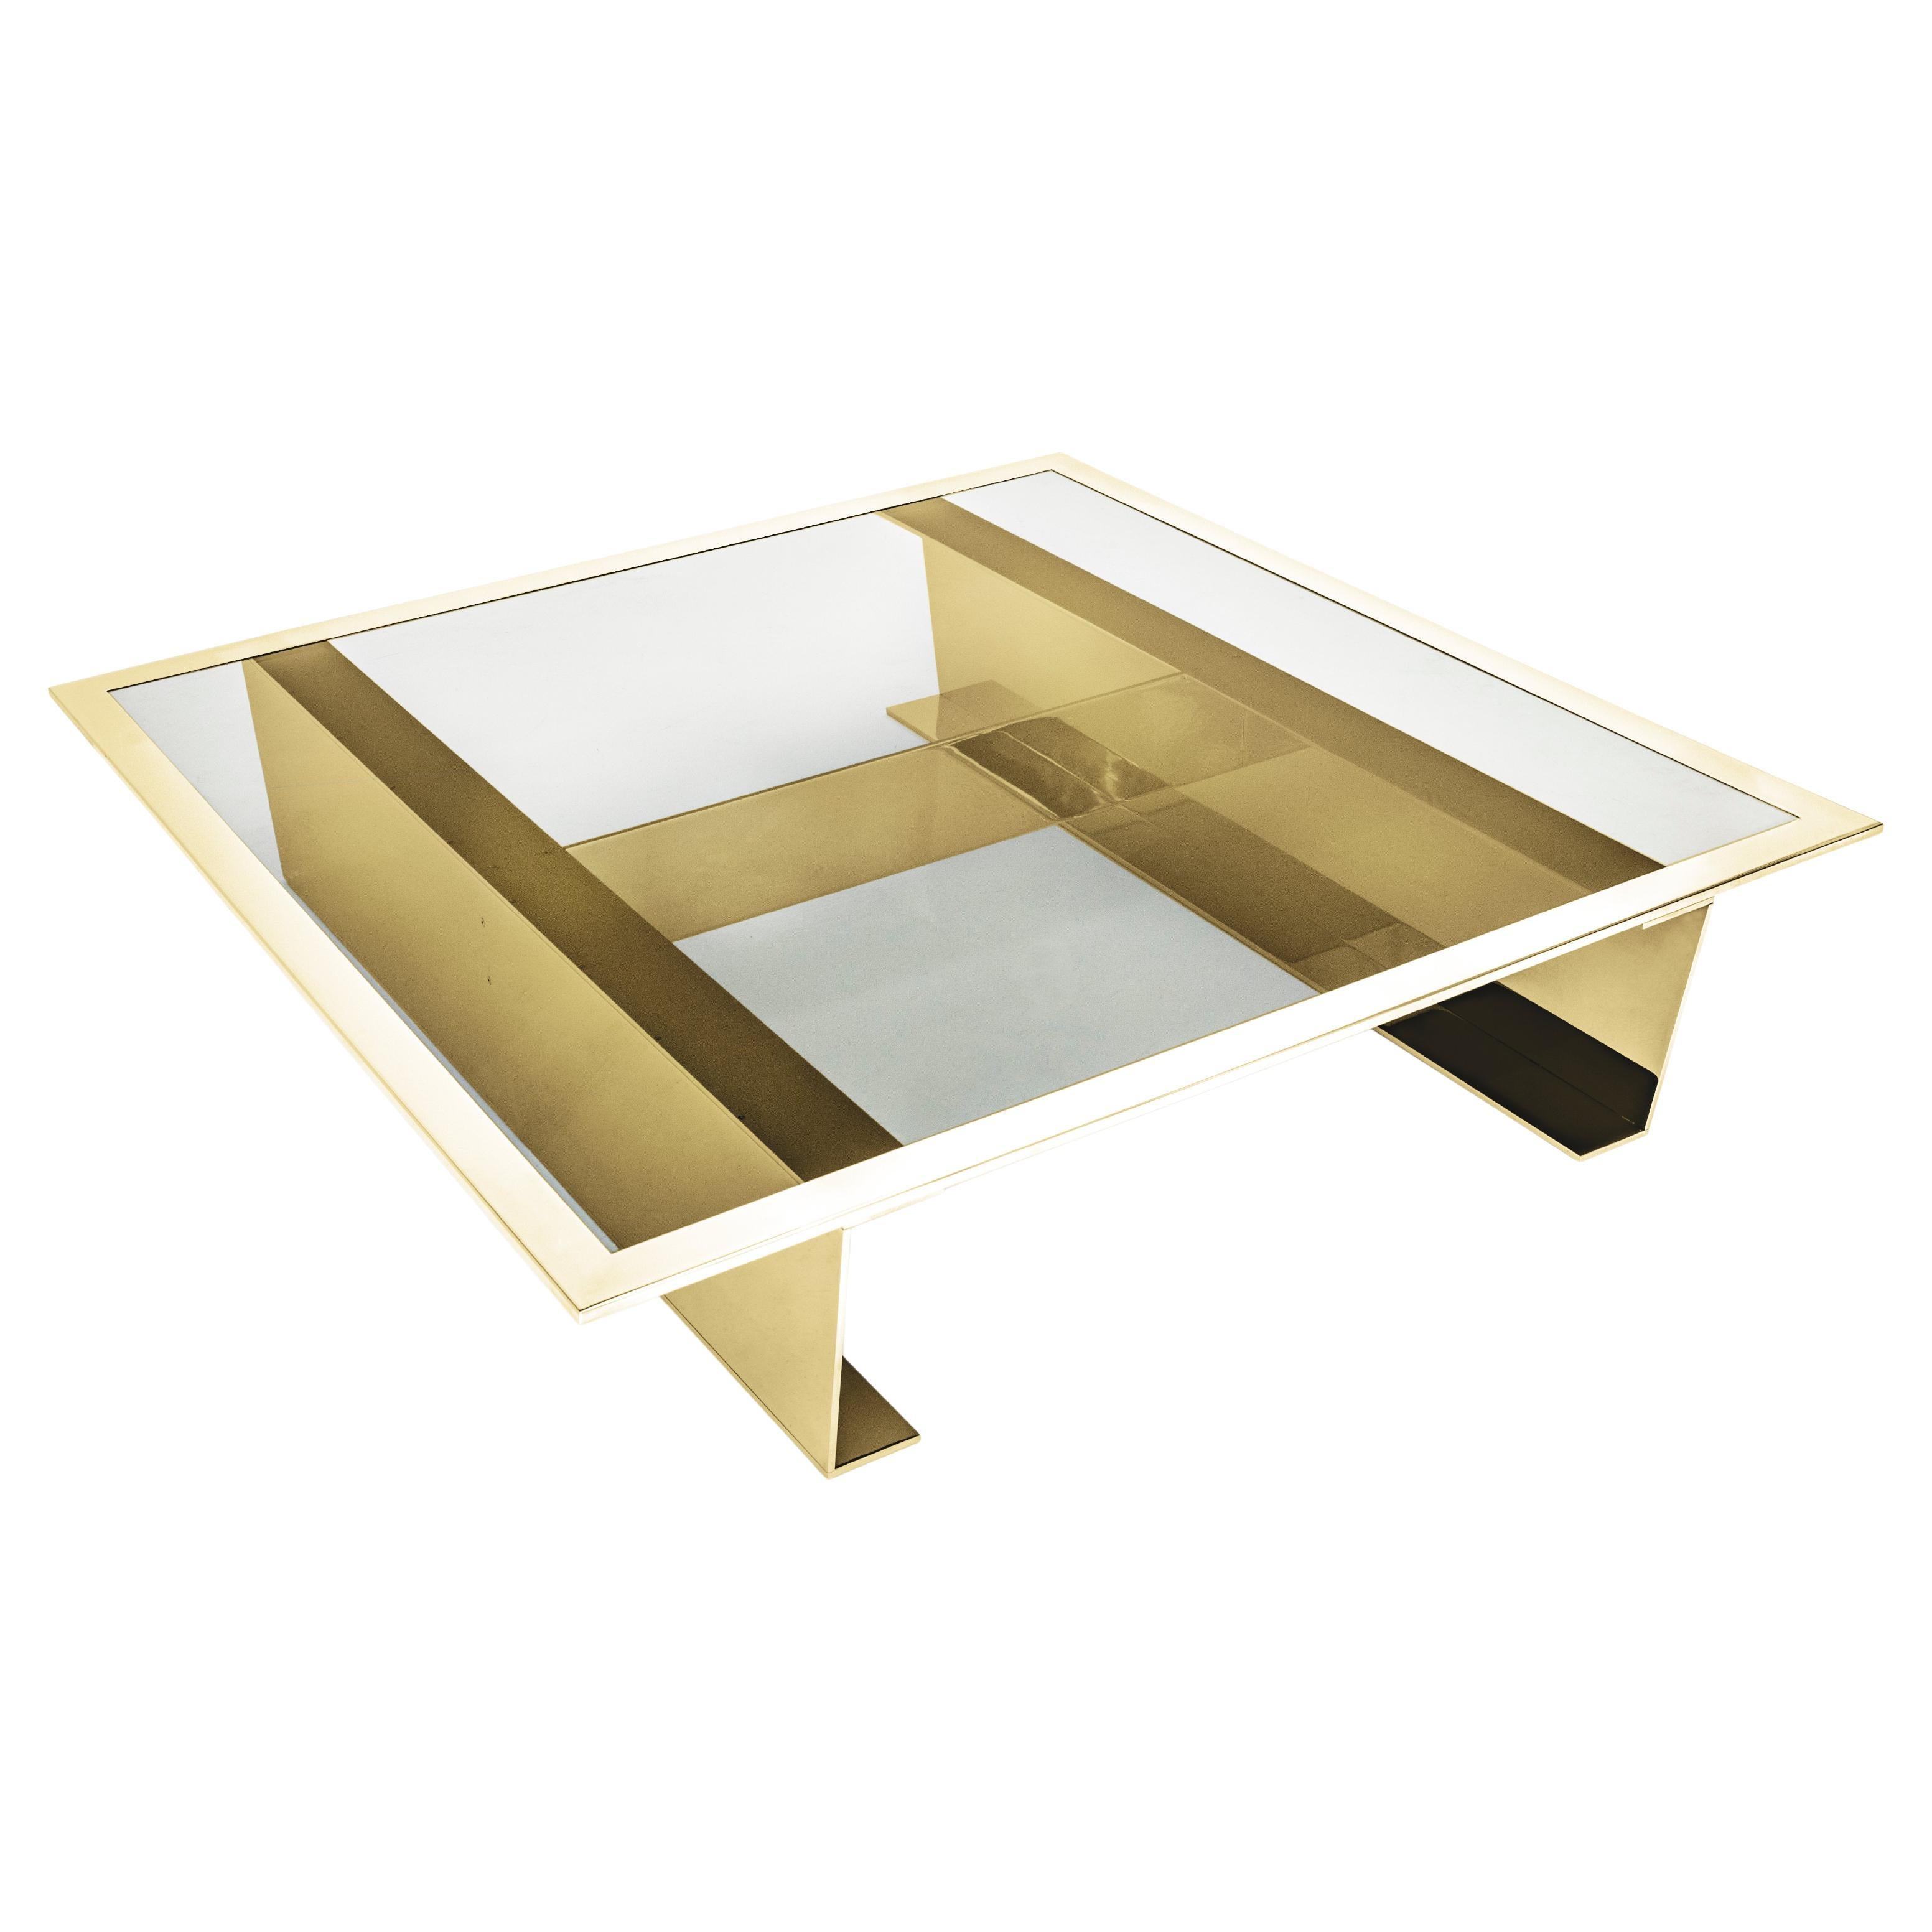 Mega, a large coffee table in silver chromed or gold polished brass finish